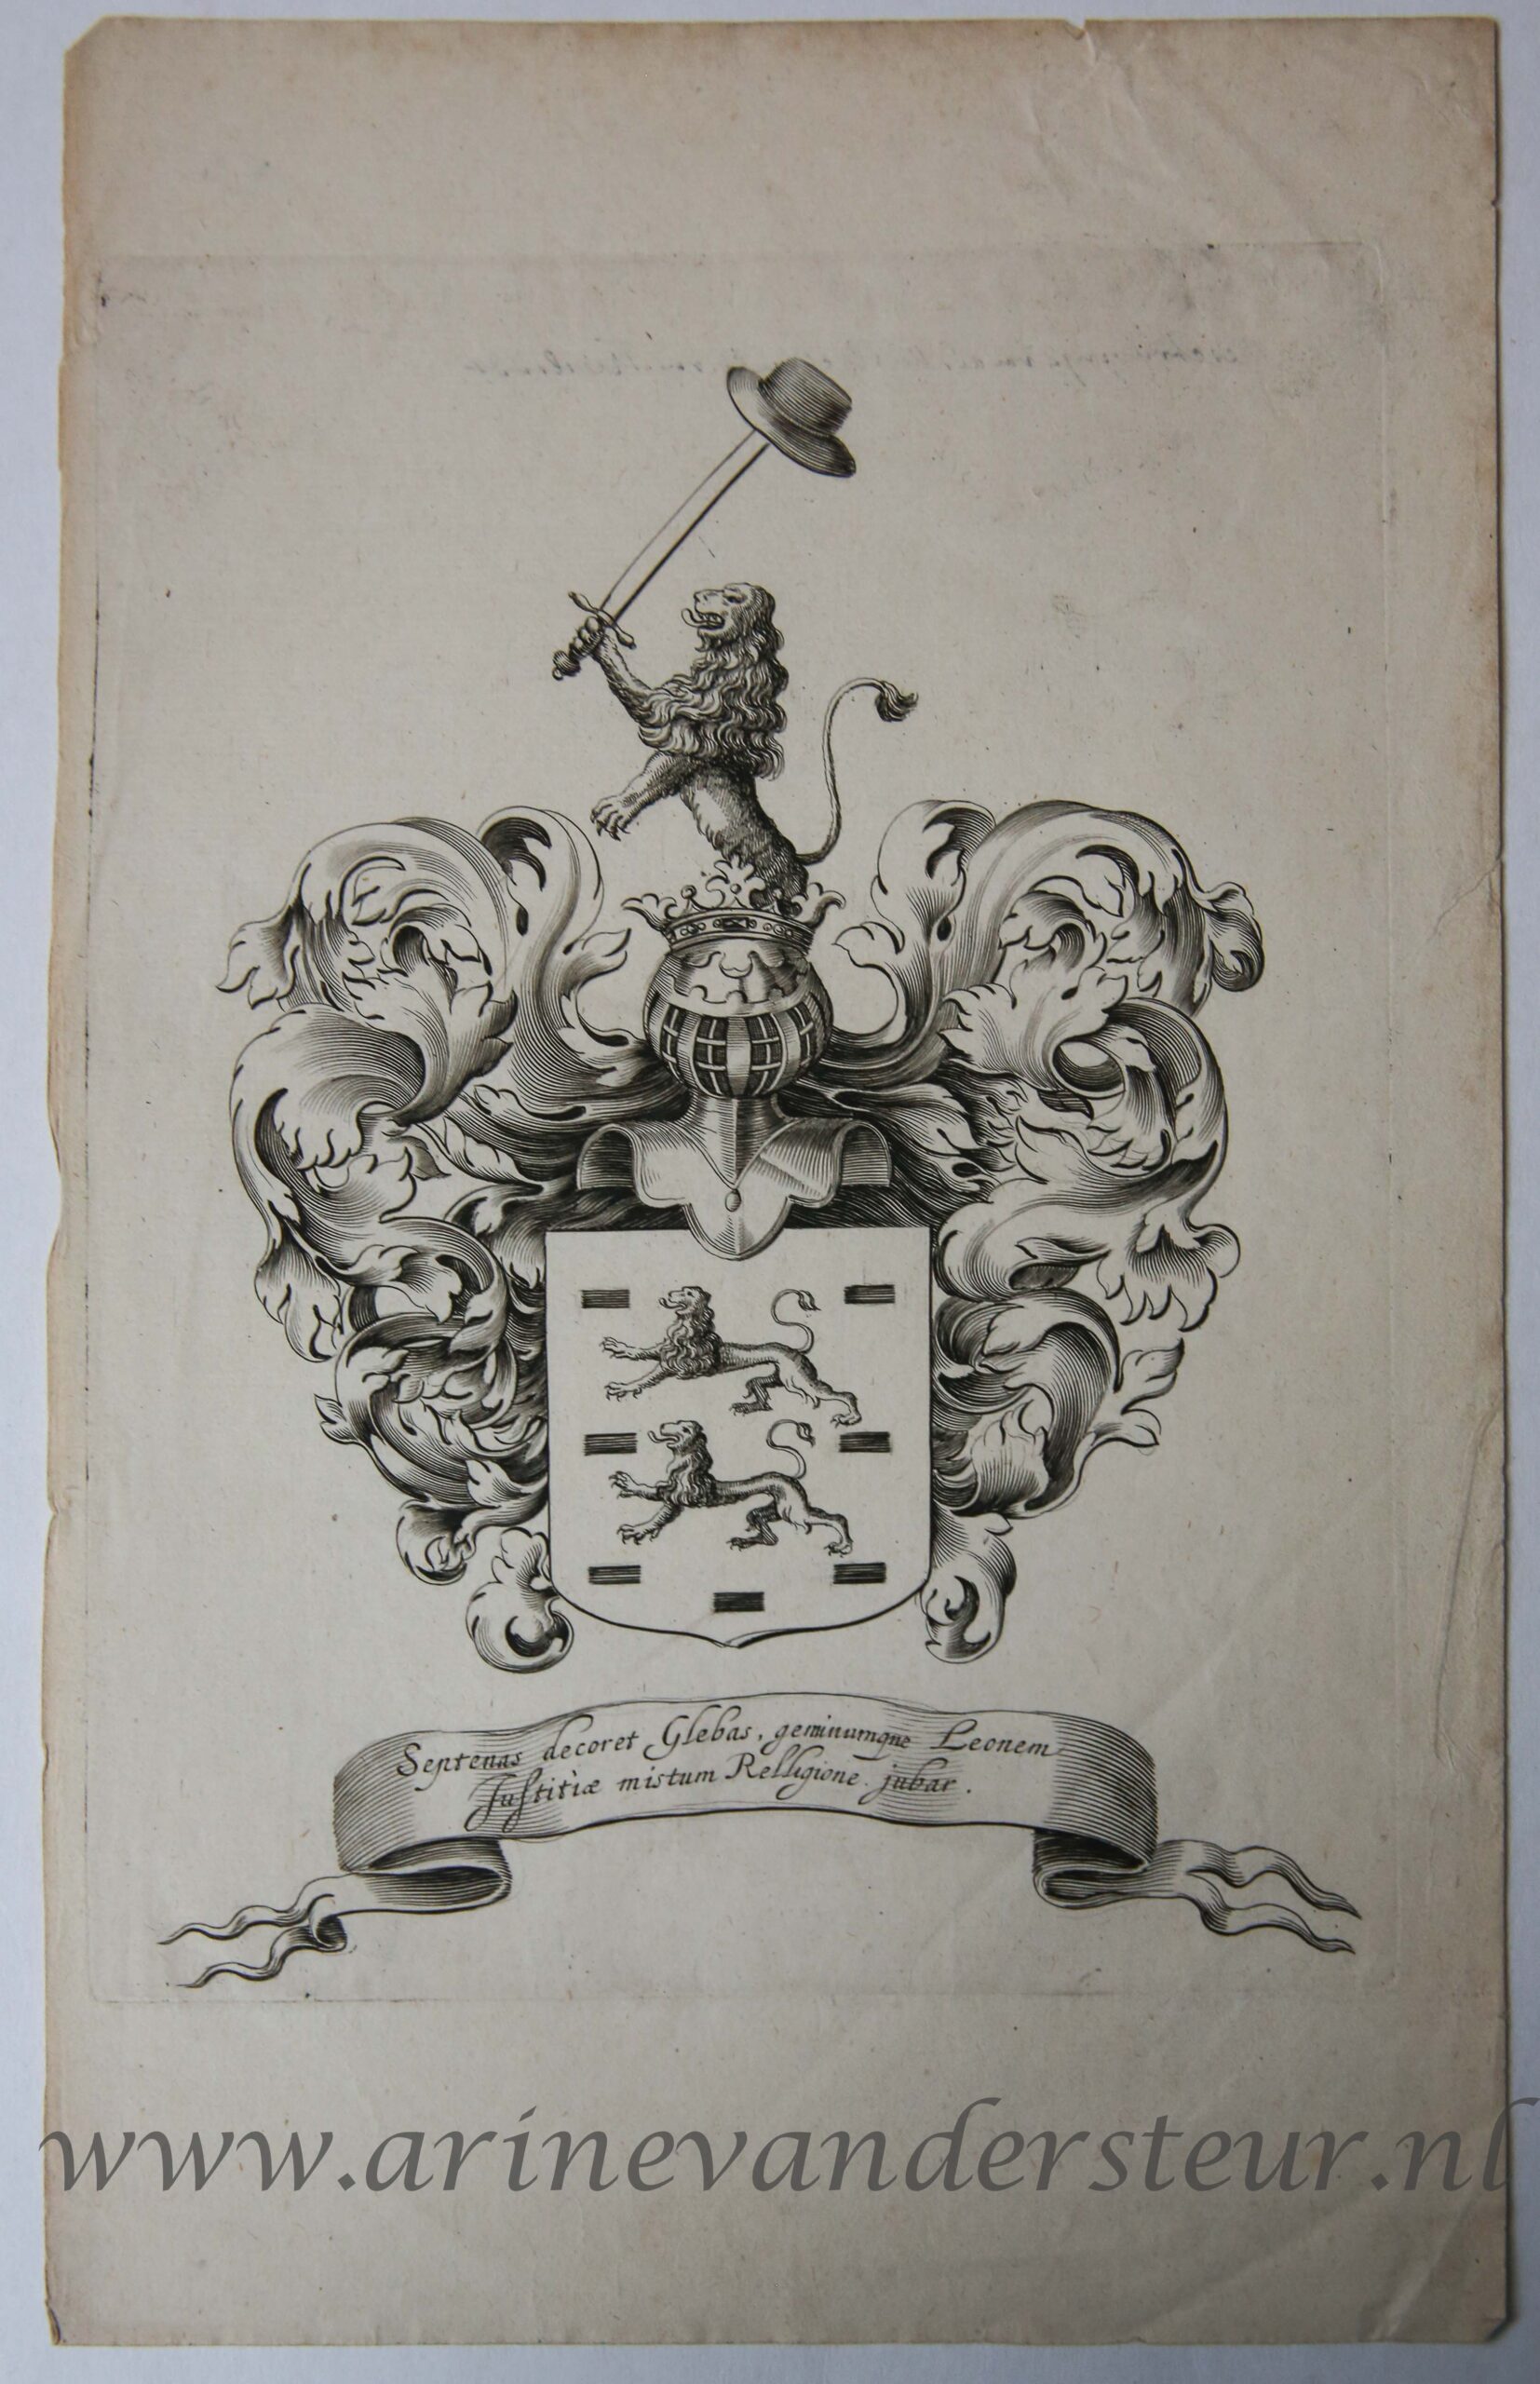 [Antique print, wapenkaart, engraving] The States of Friesland, published 1664, 1 p.